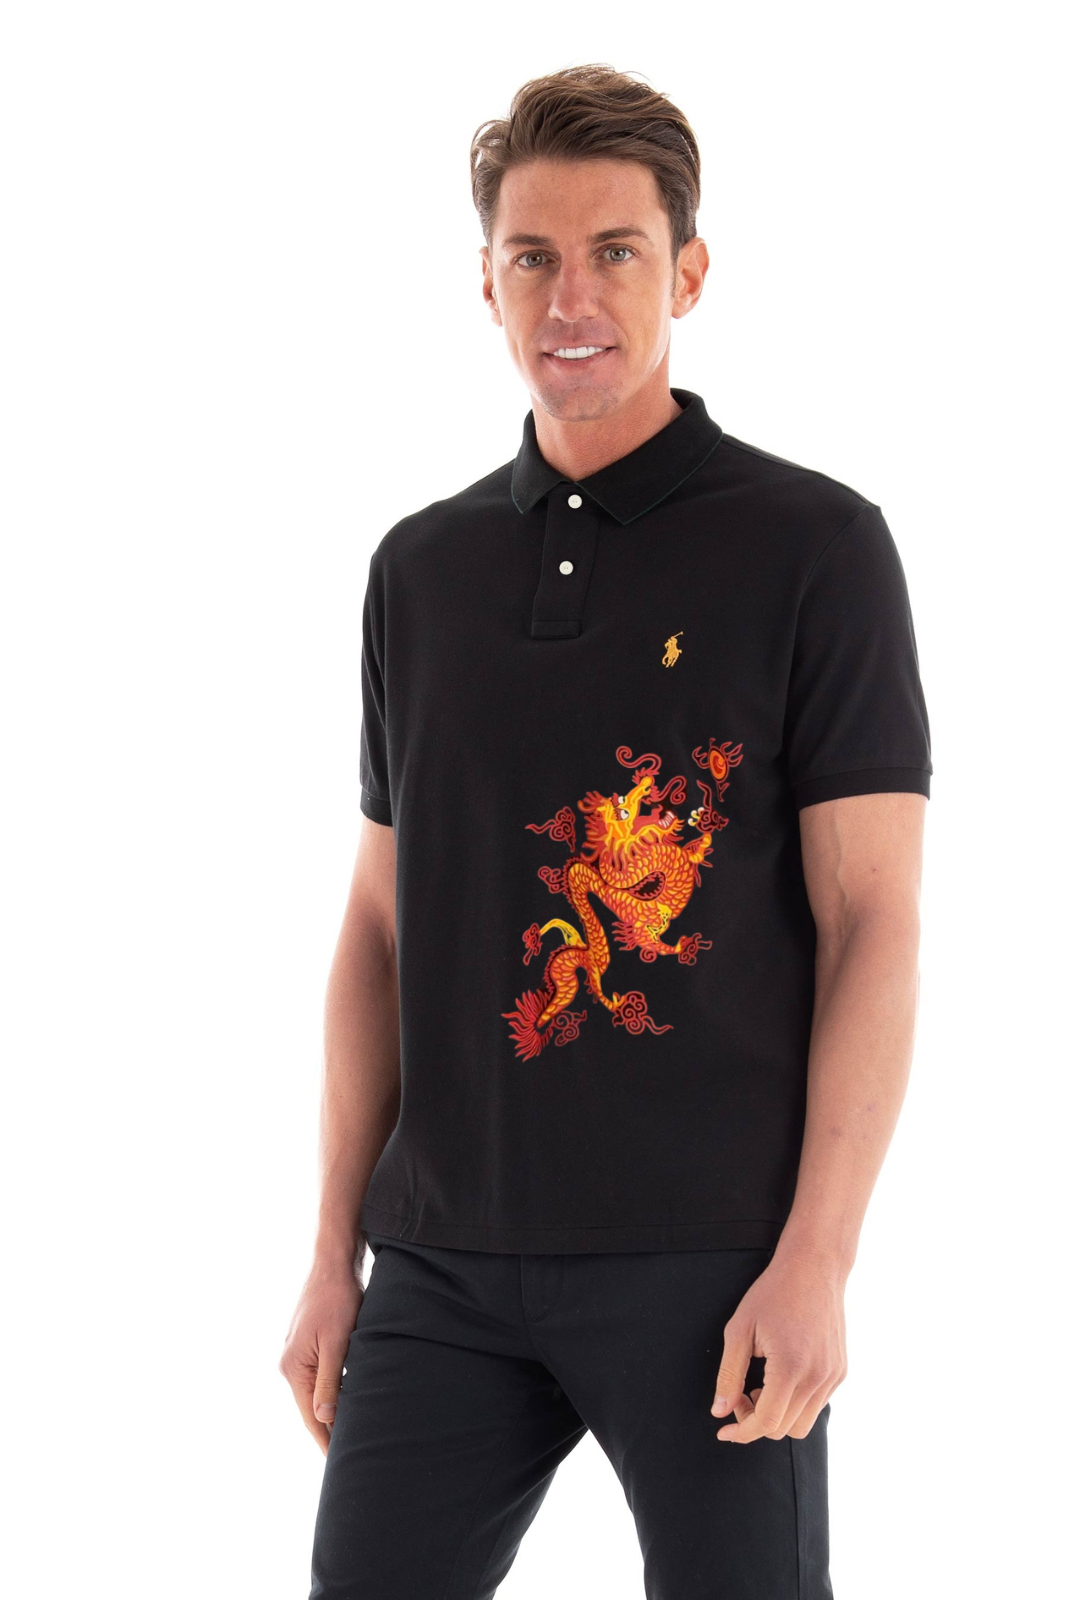 P-Beast Polo Black 24 (Limited Edition)